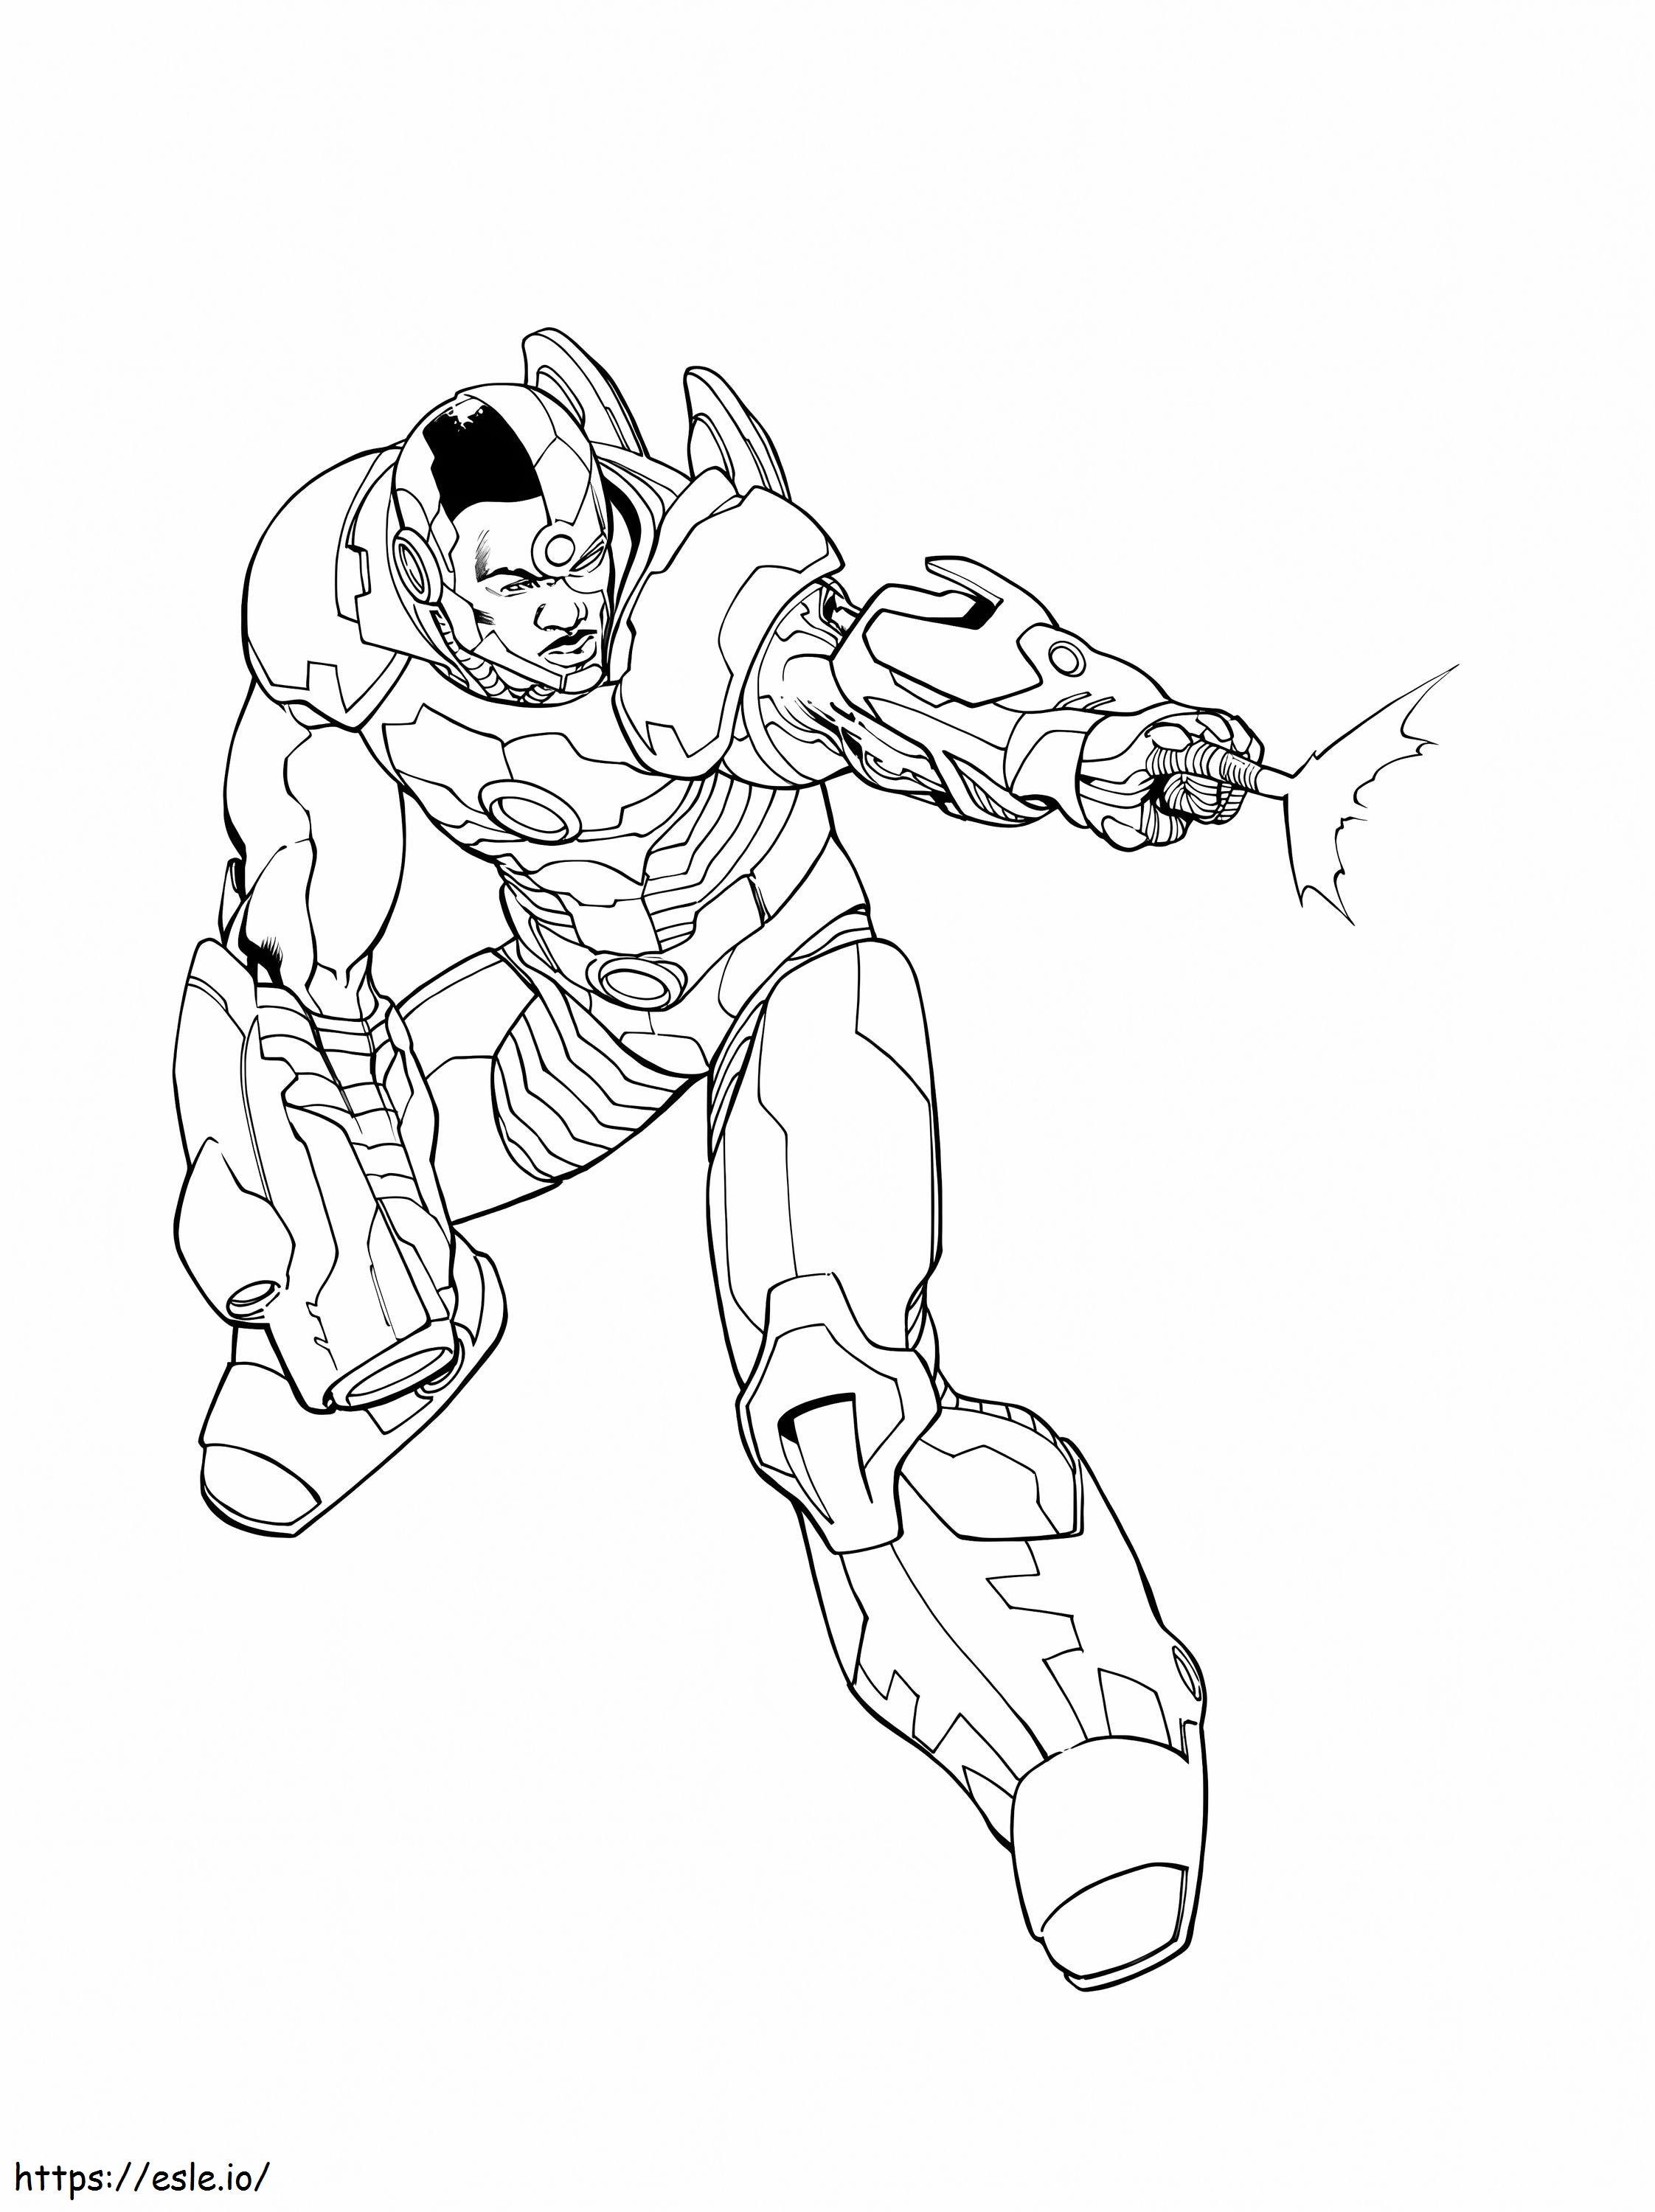 Cyborg Fighting coloring page